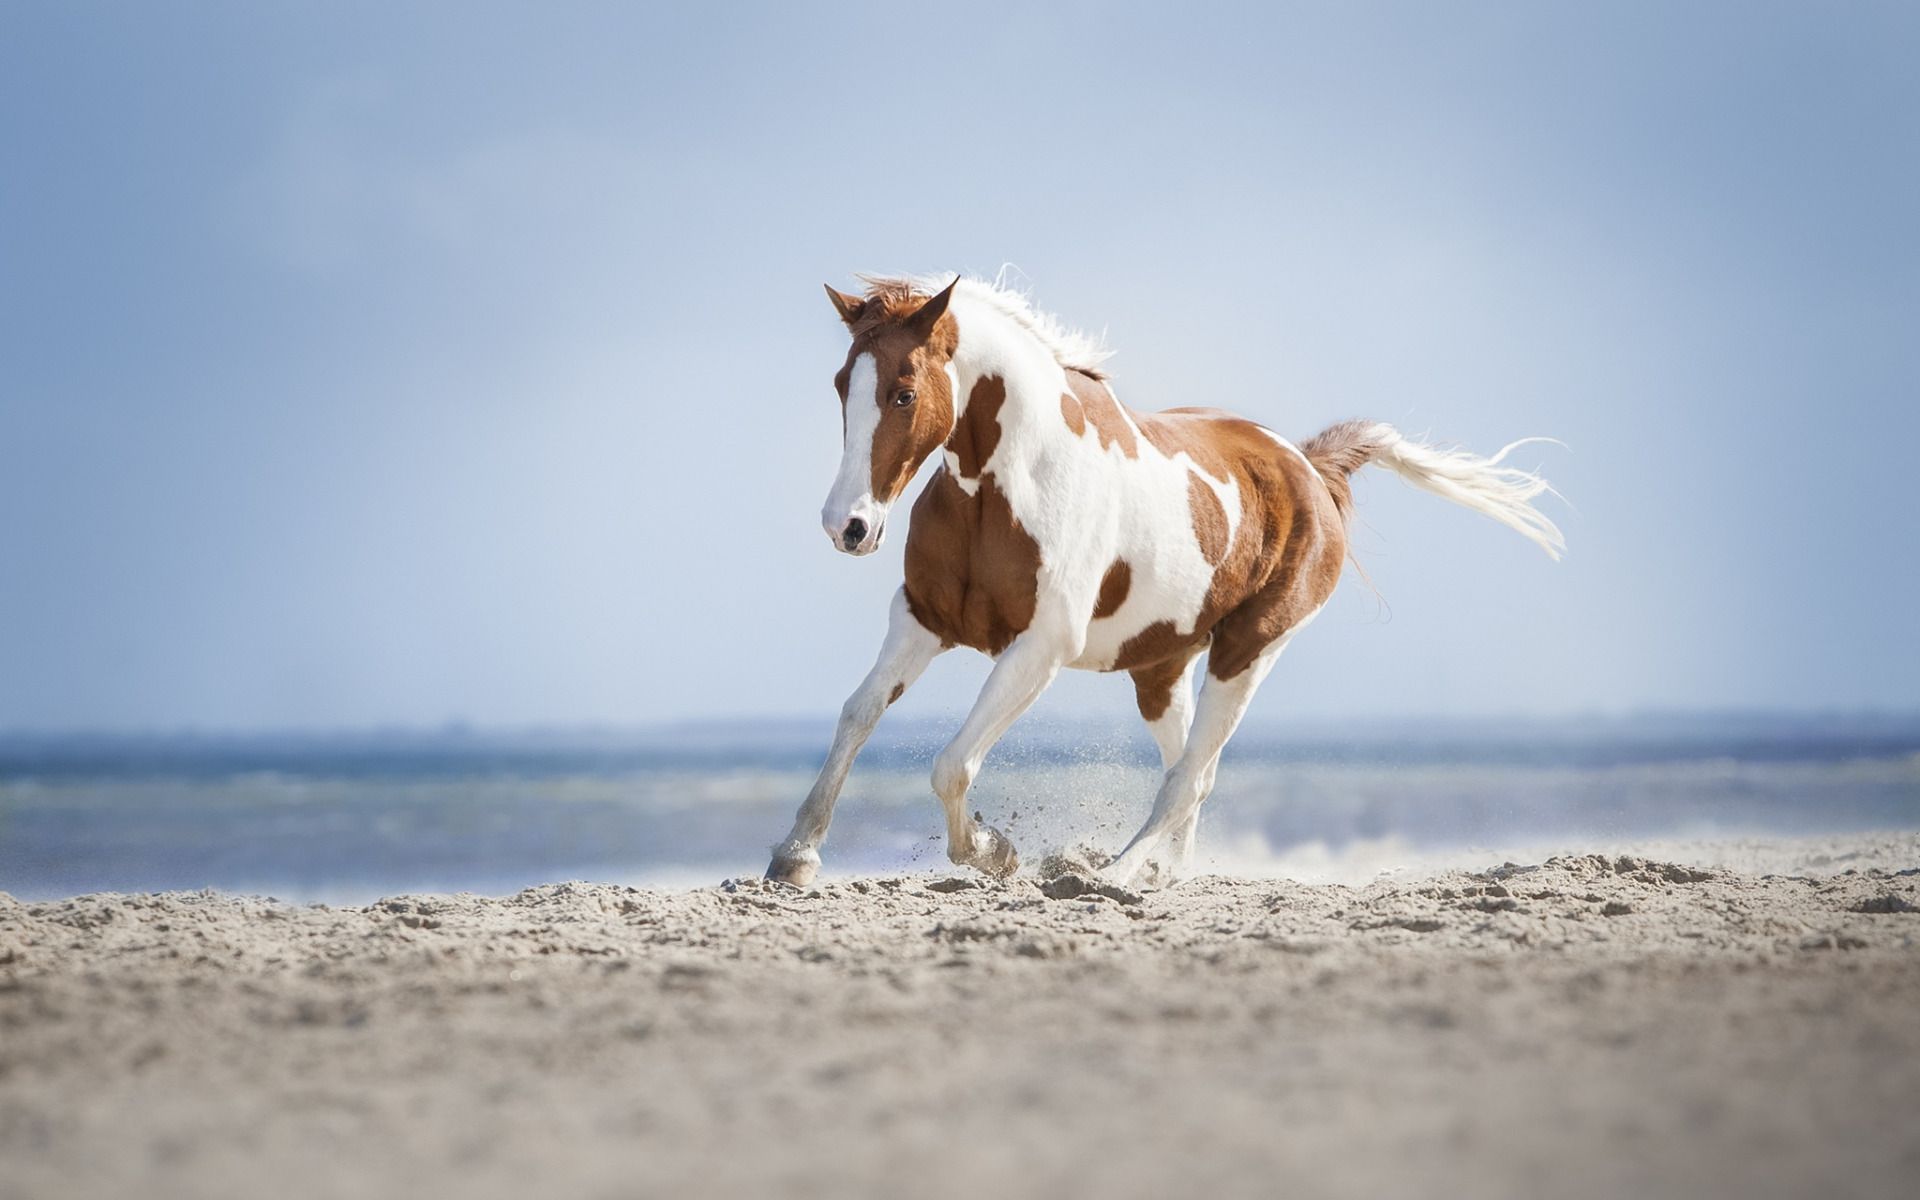 Download wallpaper horse, summer, white horse with brown spots